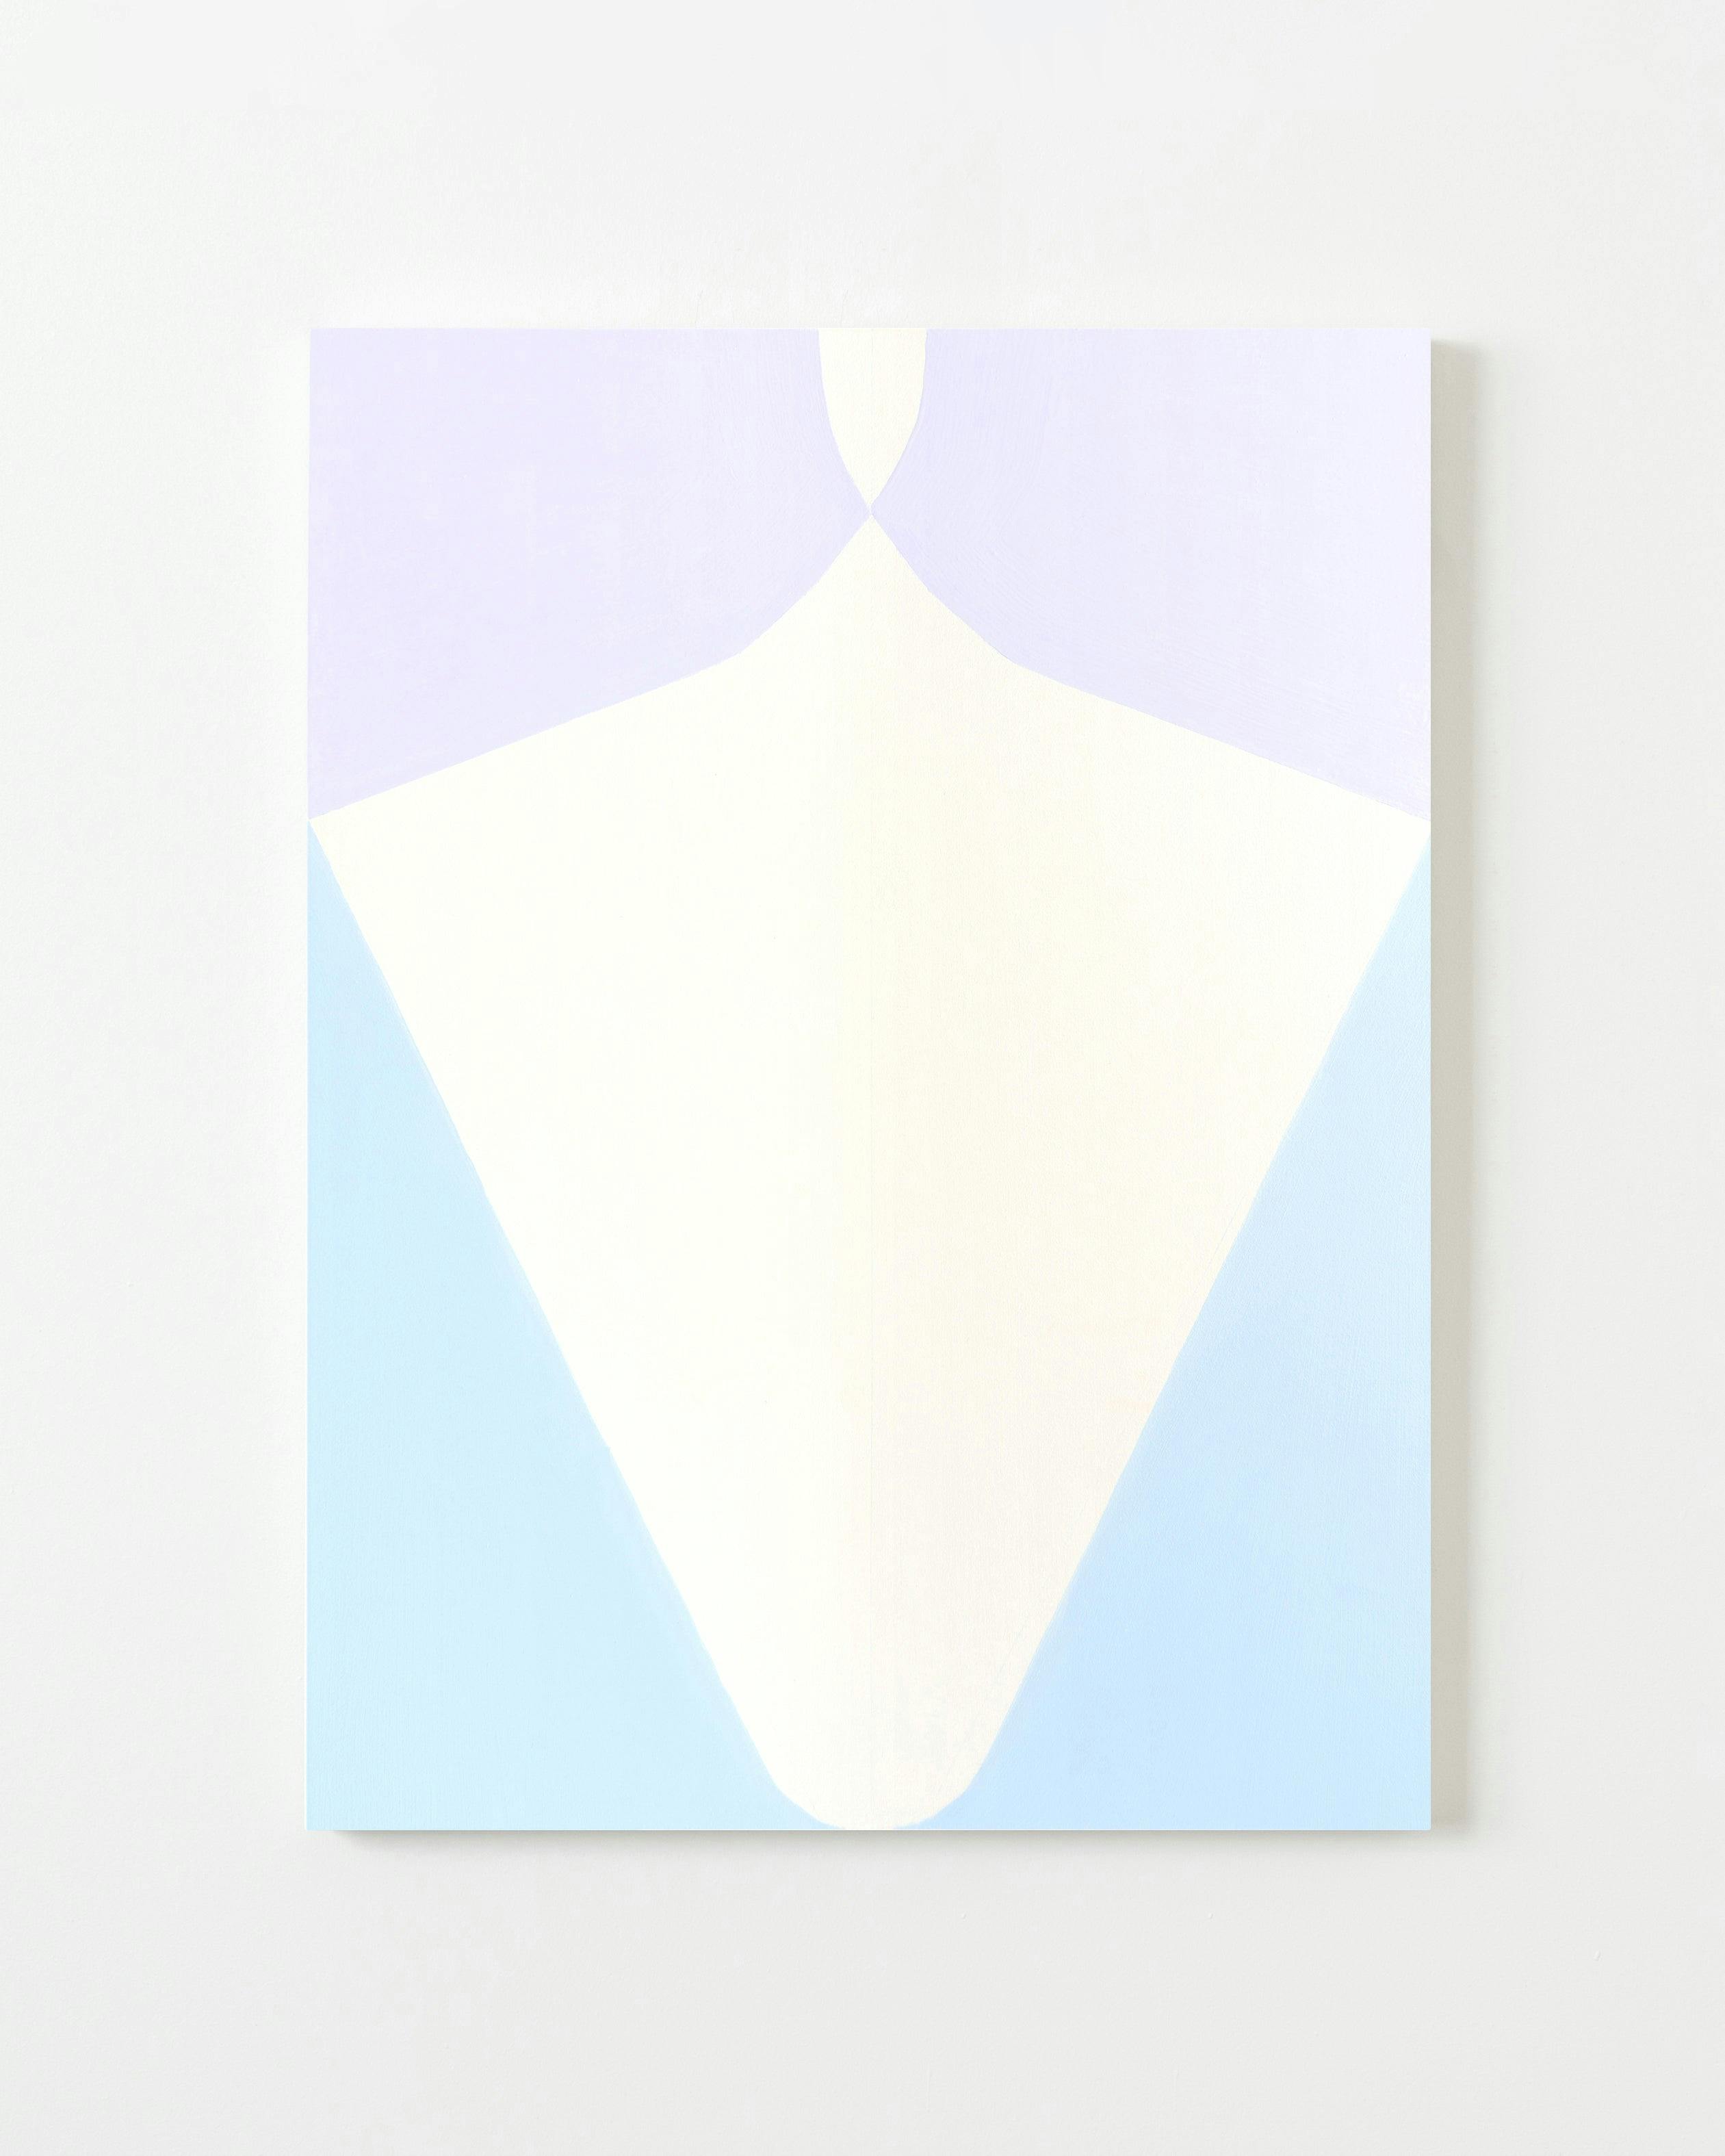 Painting by Aschely Vaughan Cone titled "Ray in Pink and Blue Light".